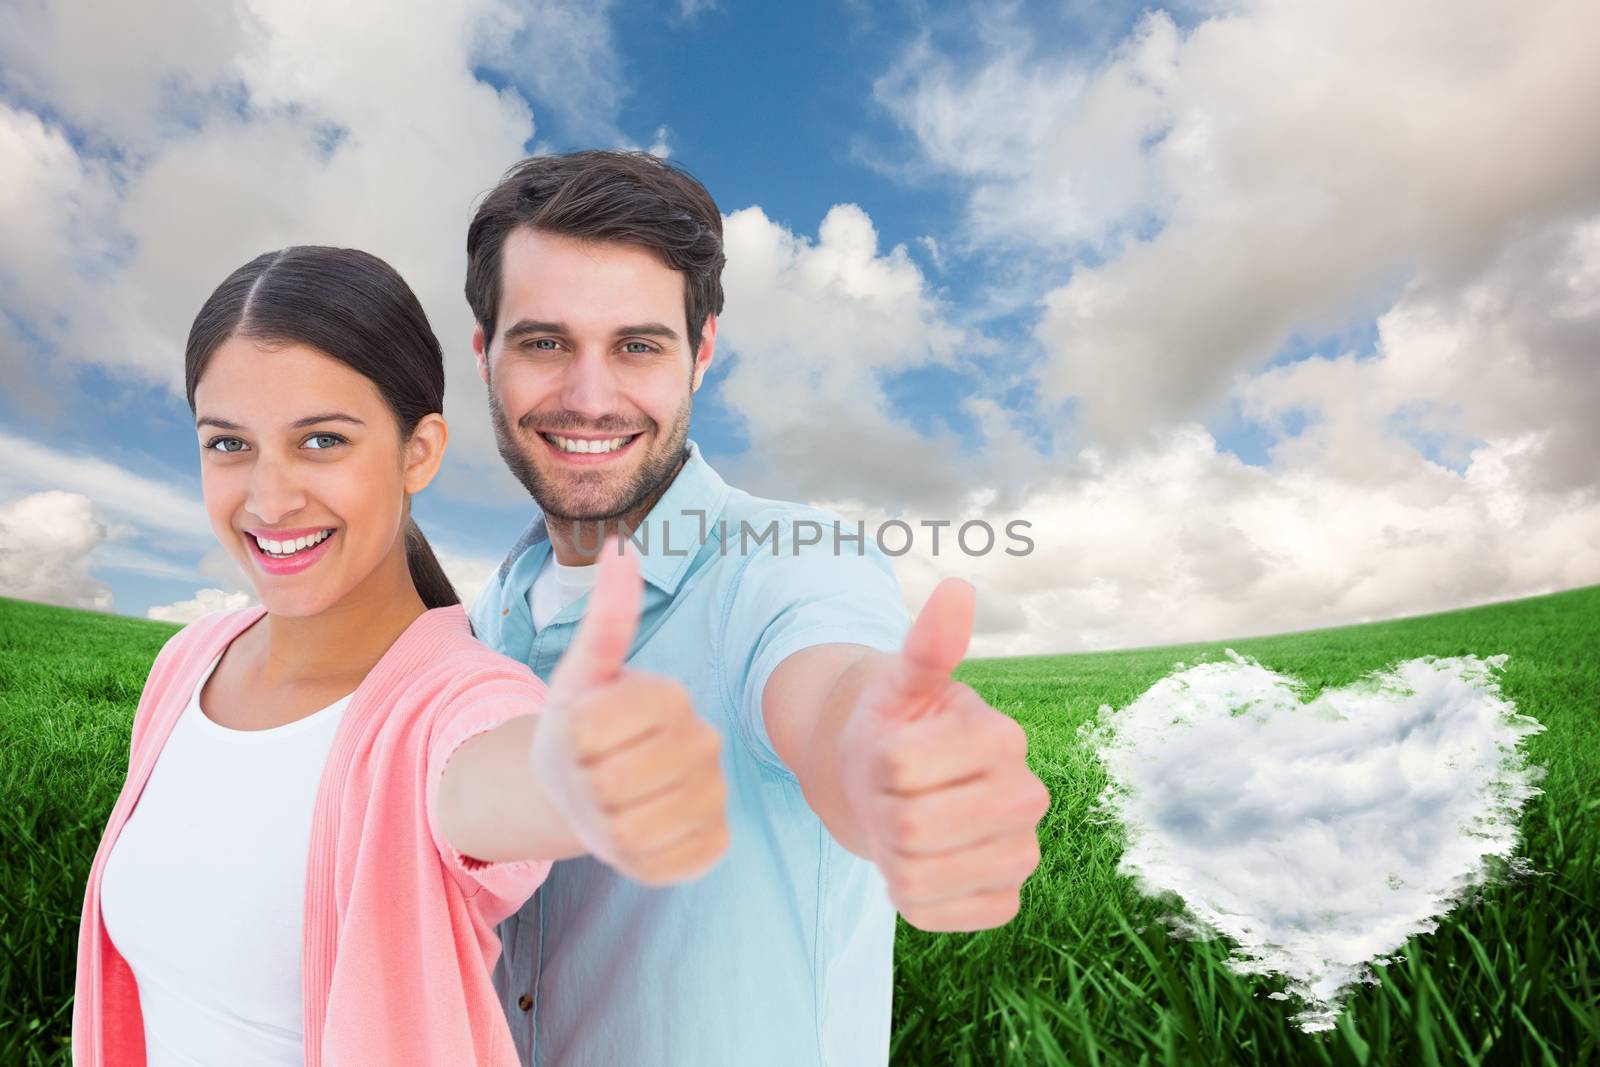 Composite image of happy couple showing thumbs up by Wavebreakmedia